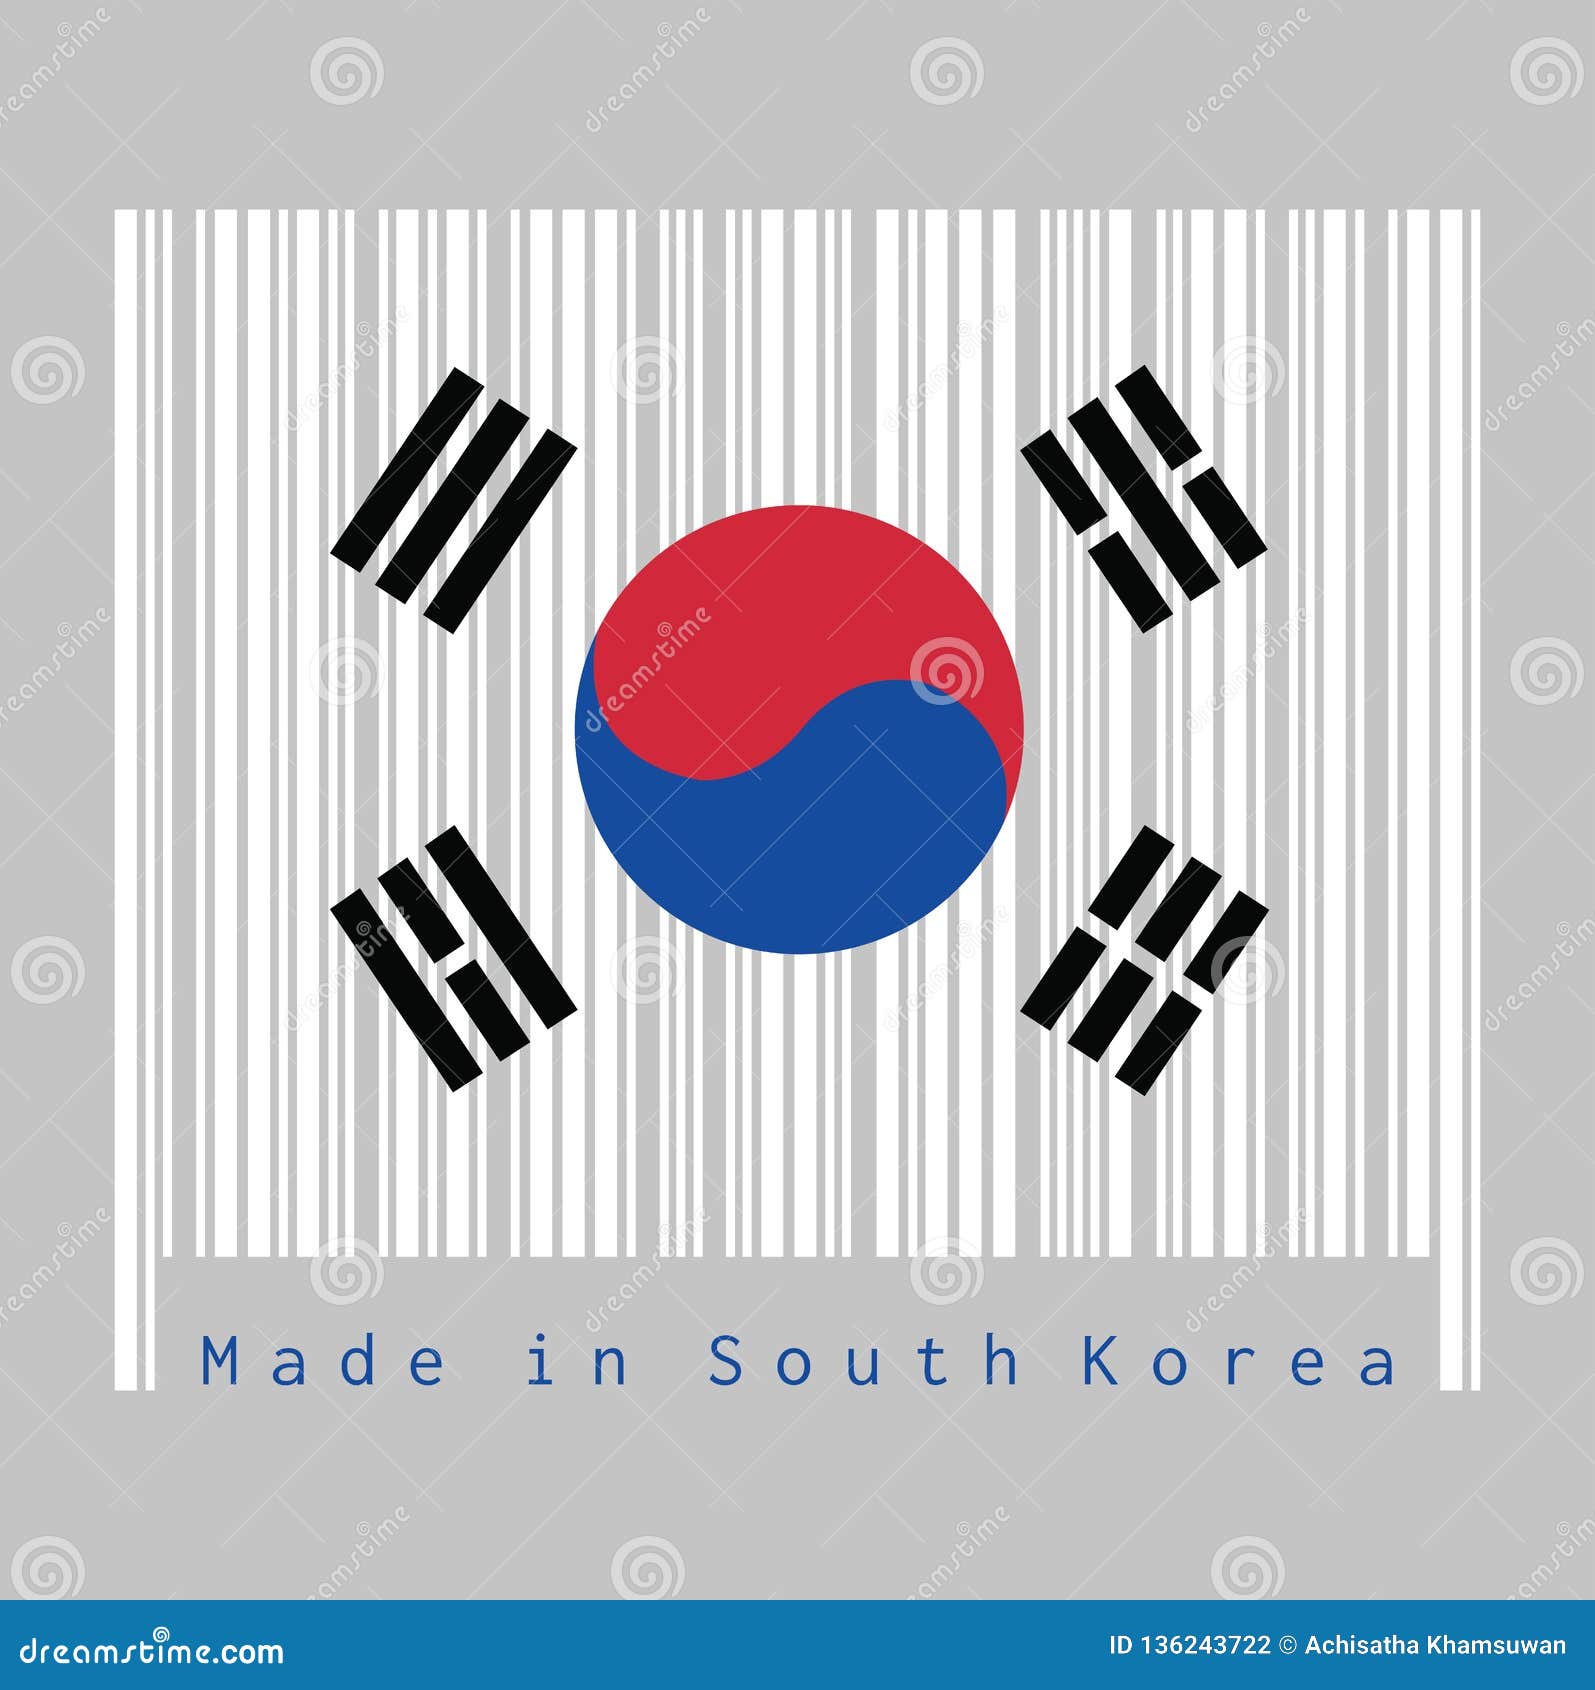 barcode set the color of south korea flag, the white color with taegeuk and black trigrams on black background